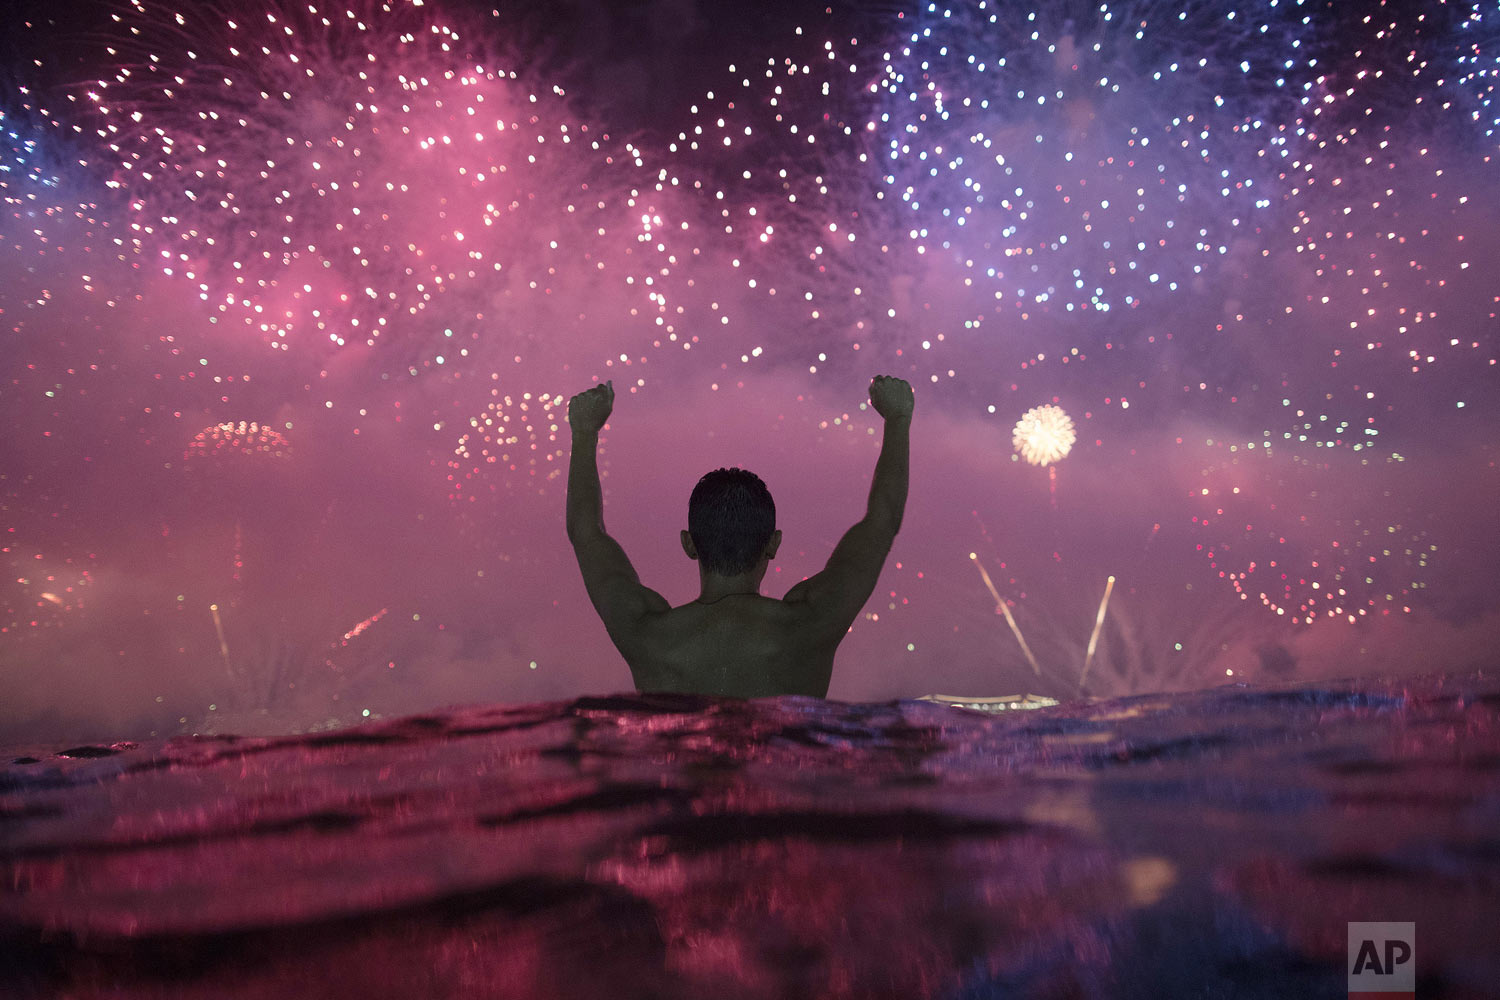  A man stands in the water as he watches fireworks over Copacabana Beach during New Year's celebrations in Rio de Janeiro, Brazil, Tuesday, Jan. 1, 2019. (AP Photo/Leo Correa) 